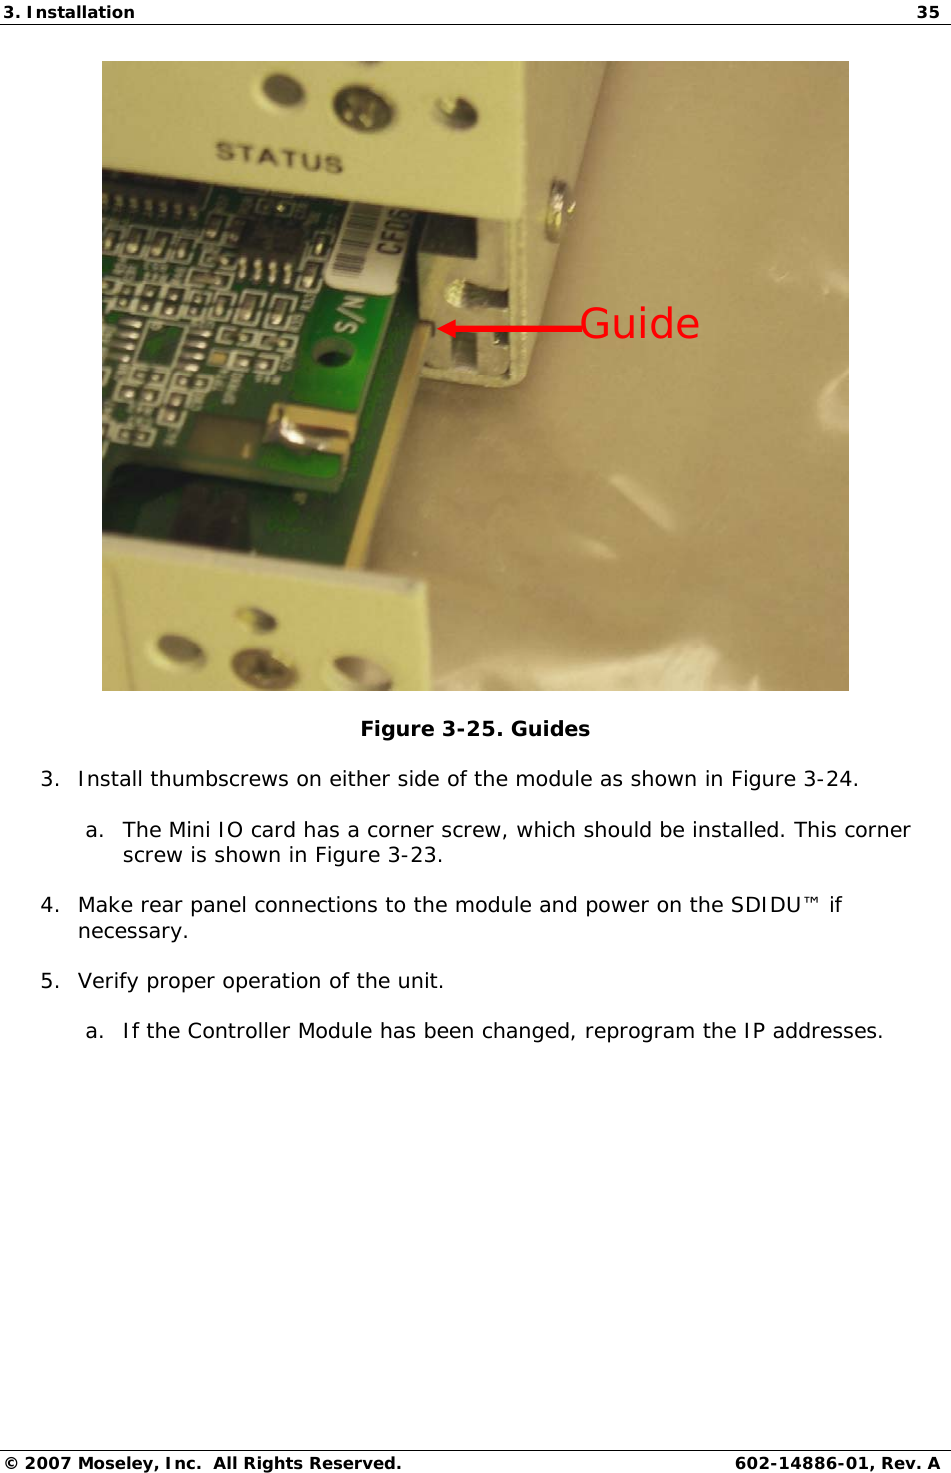 3. Installation  35 © 2007 Moseley, Inc.  All Rights Reserved.  602-14886-01, Rev. A  Figure 3-25. Guides 3. Install thumbscrews on either side of the module as shown in Figure 3-24. a. The Mini IO card has a corner screw, which should be installed. This corner screw is shown in Figure 3-23. 4. Make rear panel connections to the module and power on the SDIDU™ if necessary. 5. Verify proper operation of the unit. a. If the Controller Module has been changed, reprogram the IP addresses. Guide 